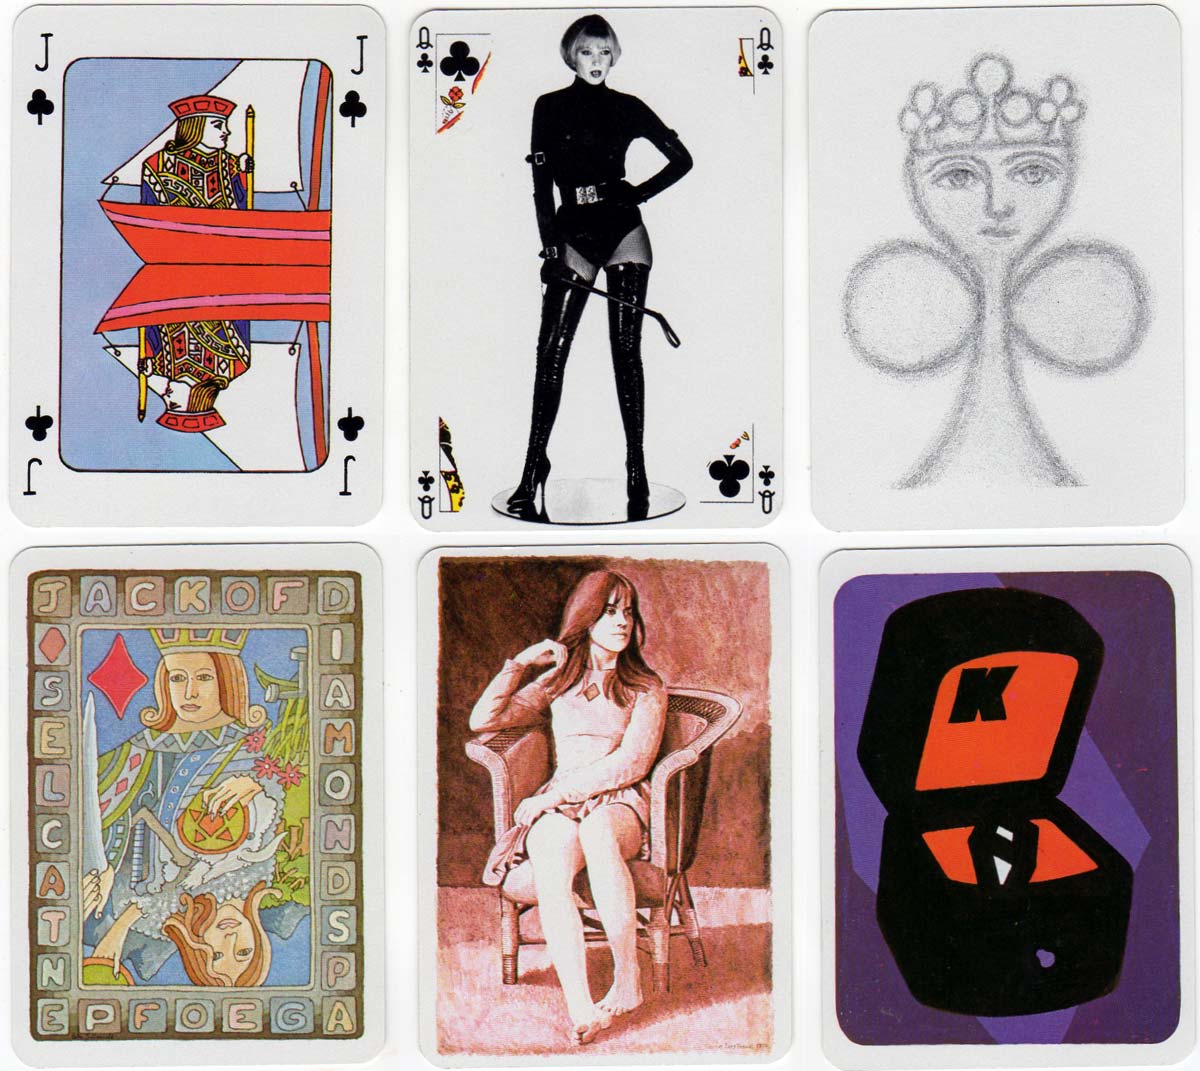 The Deck of Cards by Andrew Jones Art 1979